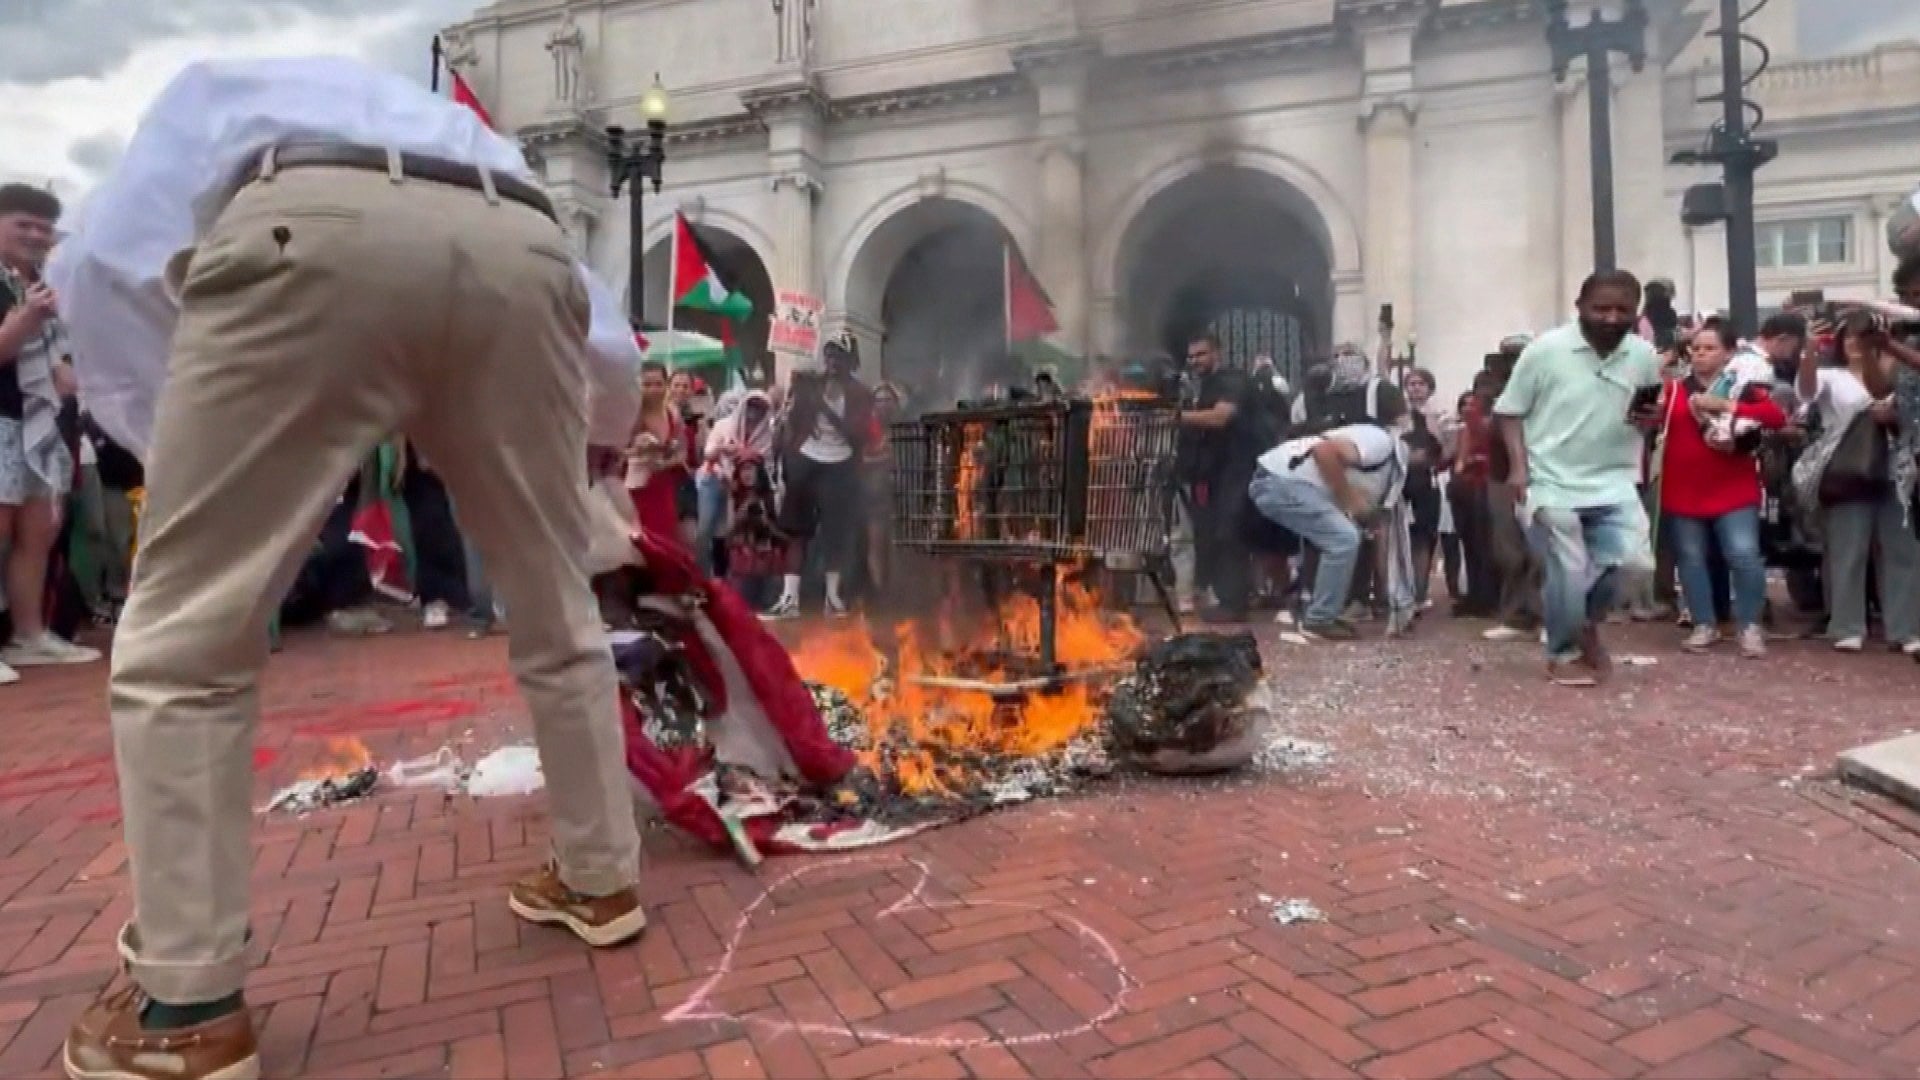 Man Tries to Save Burning American Flag at Protest